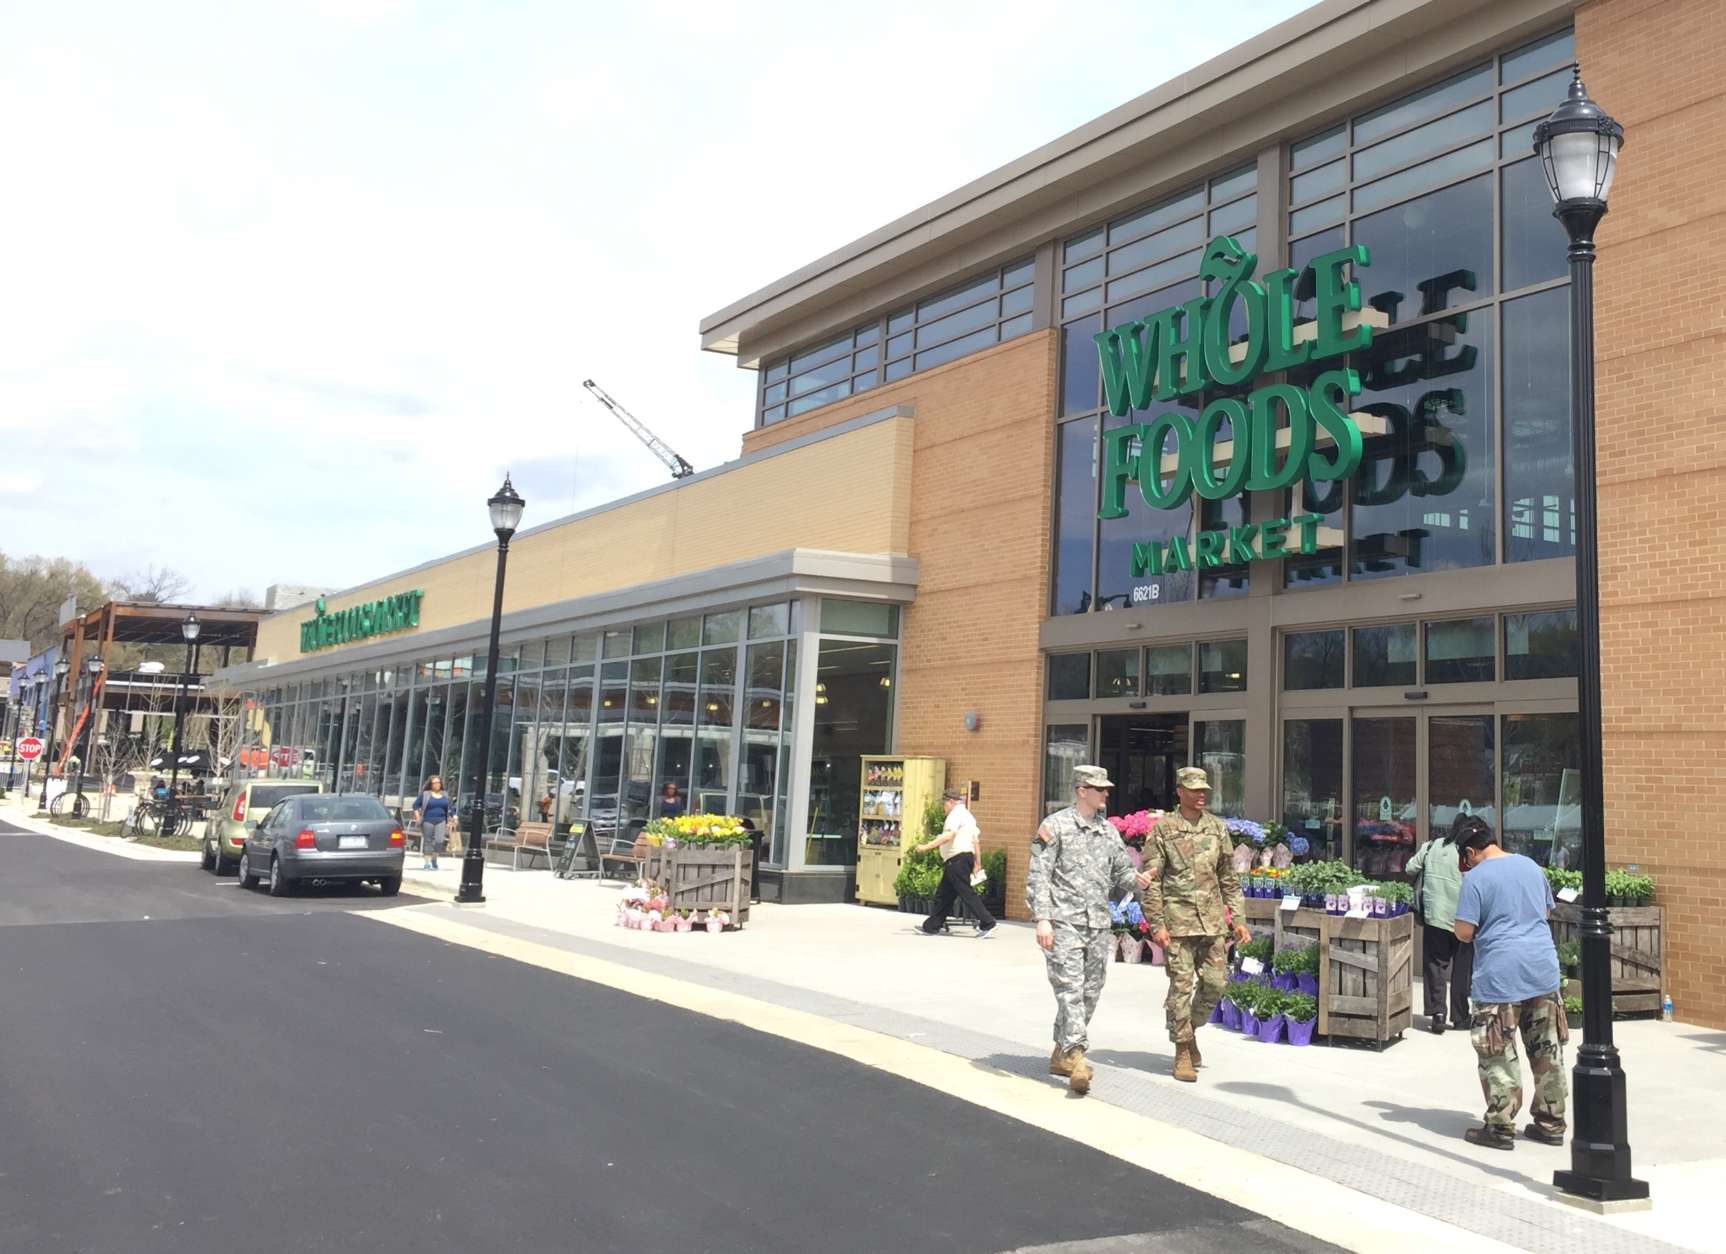 The new Whole Foods Market in Riverdale Park is at 6612 Baltimore Ave. (U.S. 1). (WTOP/Kristi King)